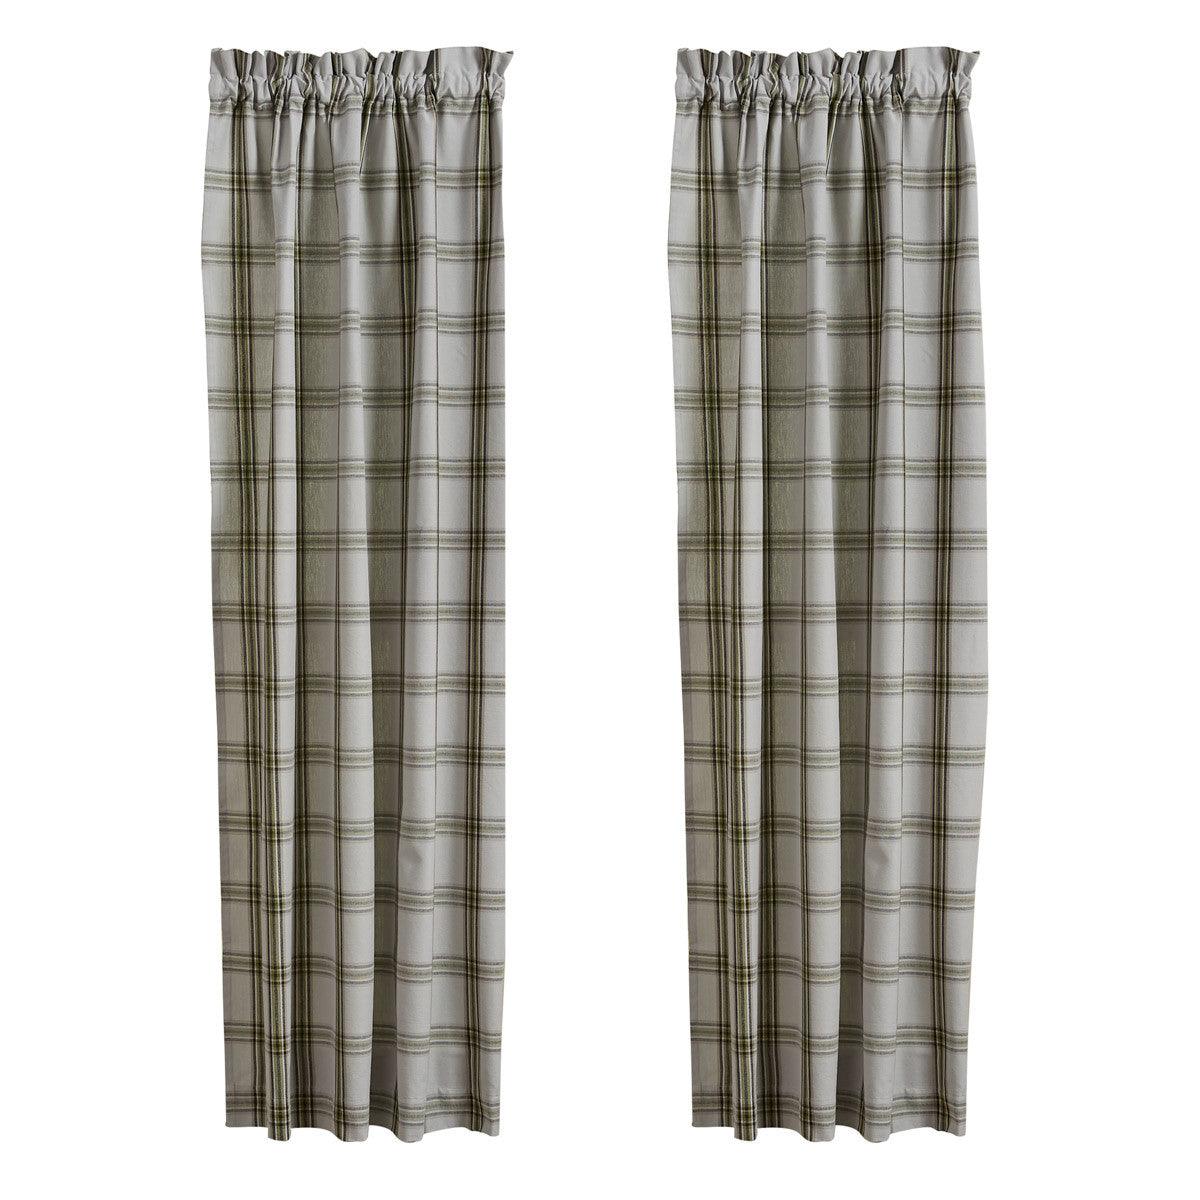 Timberline Lined Panel Pair Curtain 84" Park Designs - The Fox Decor